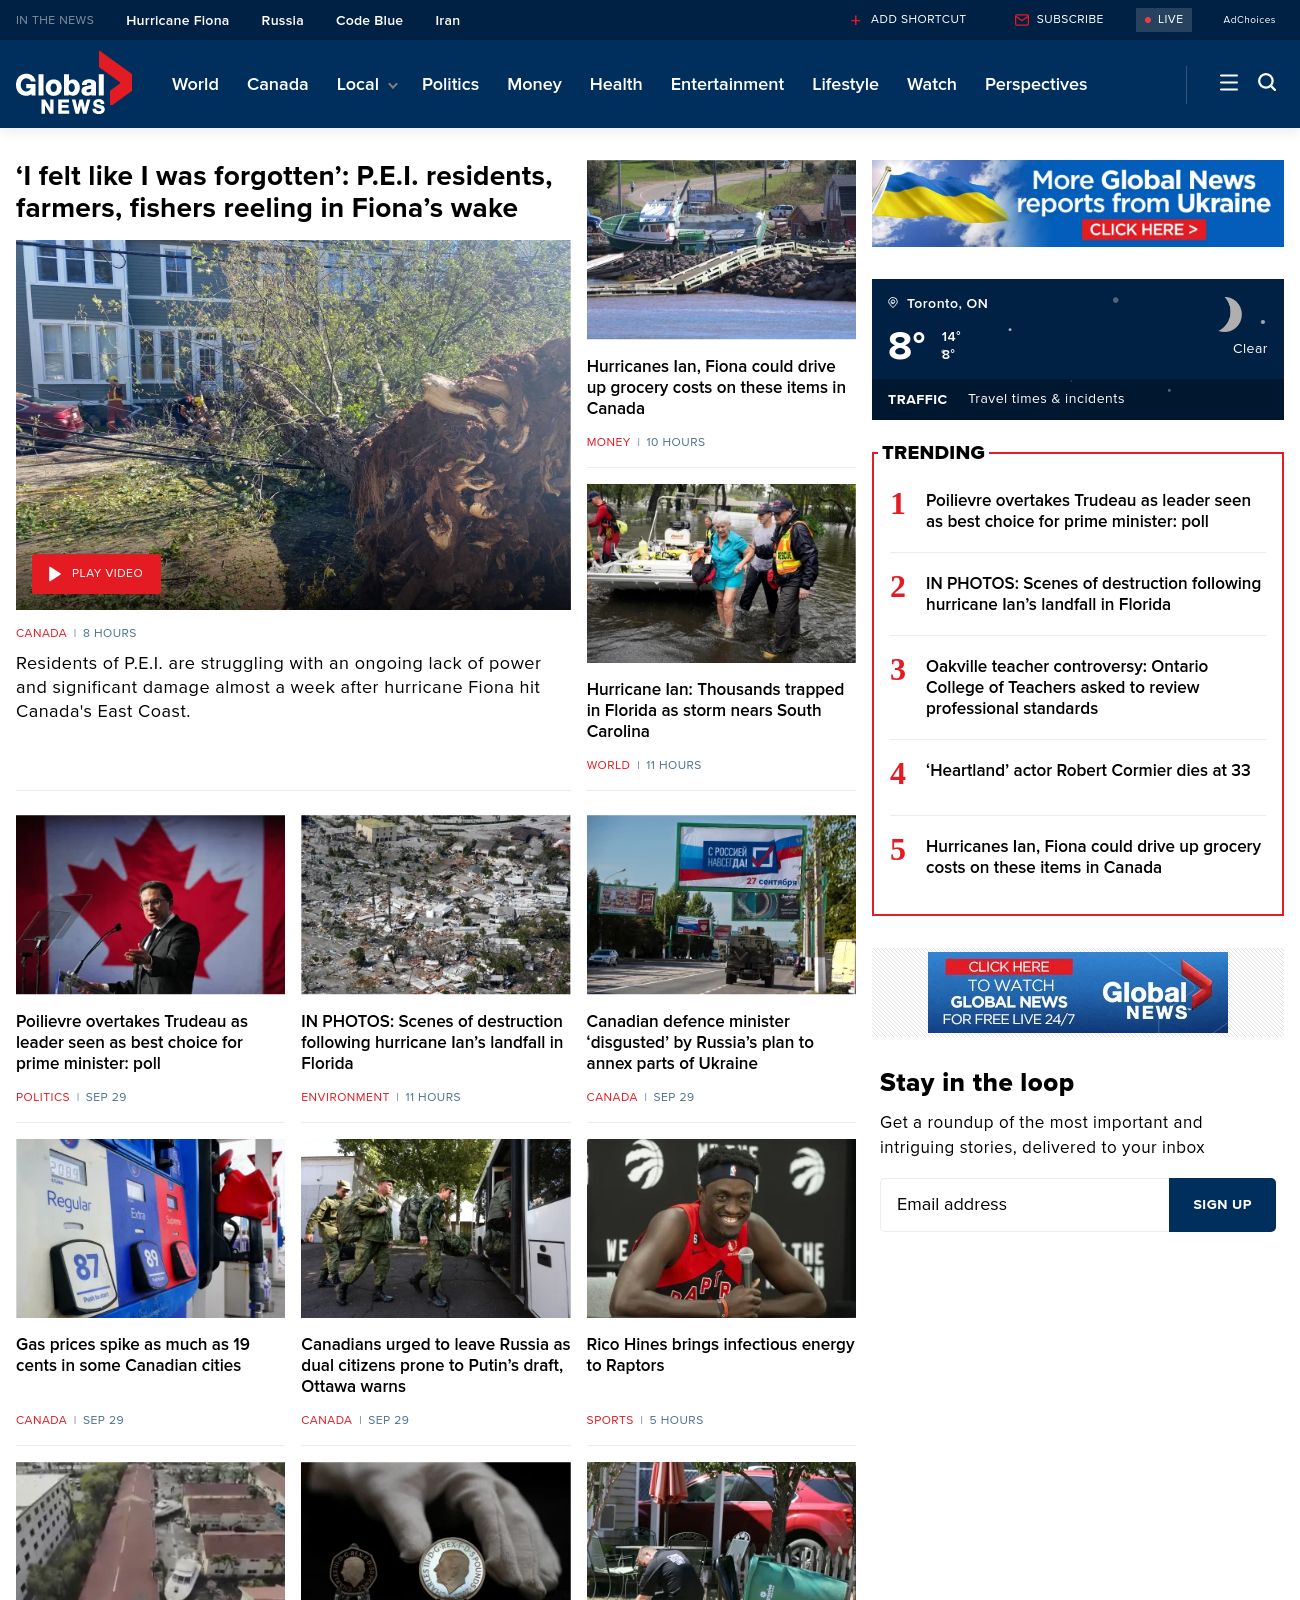 Global News at 2022-09-30 02:35:47-04:00 local time